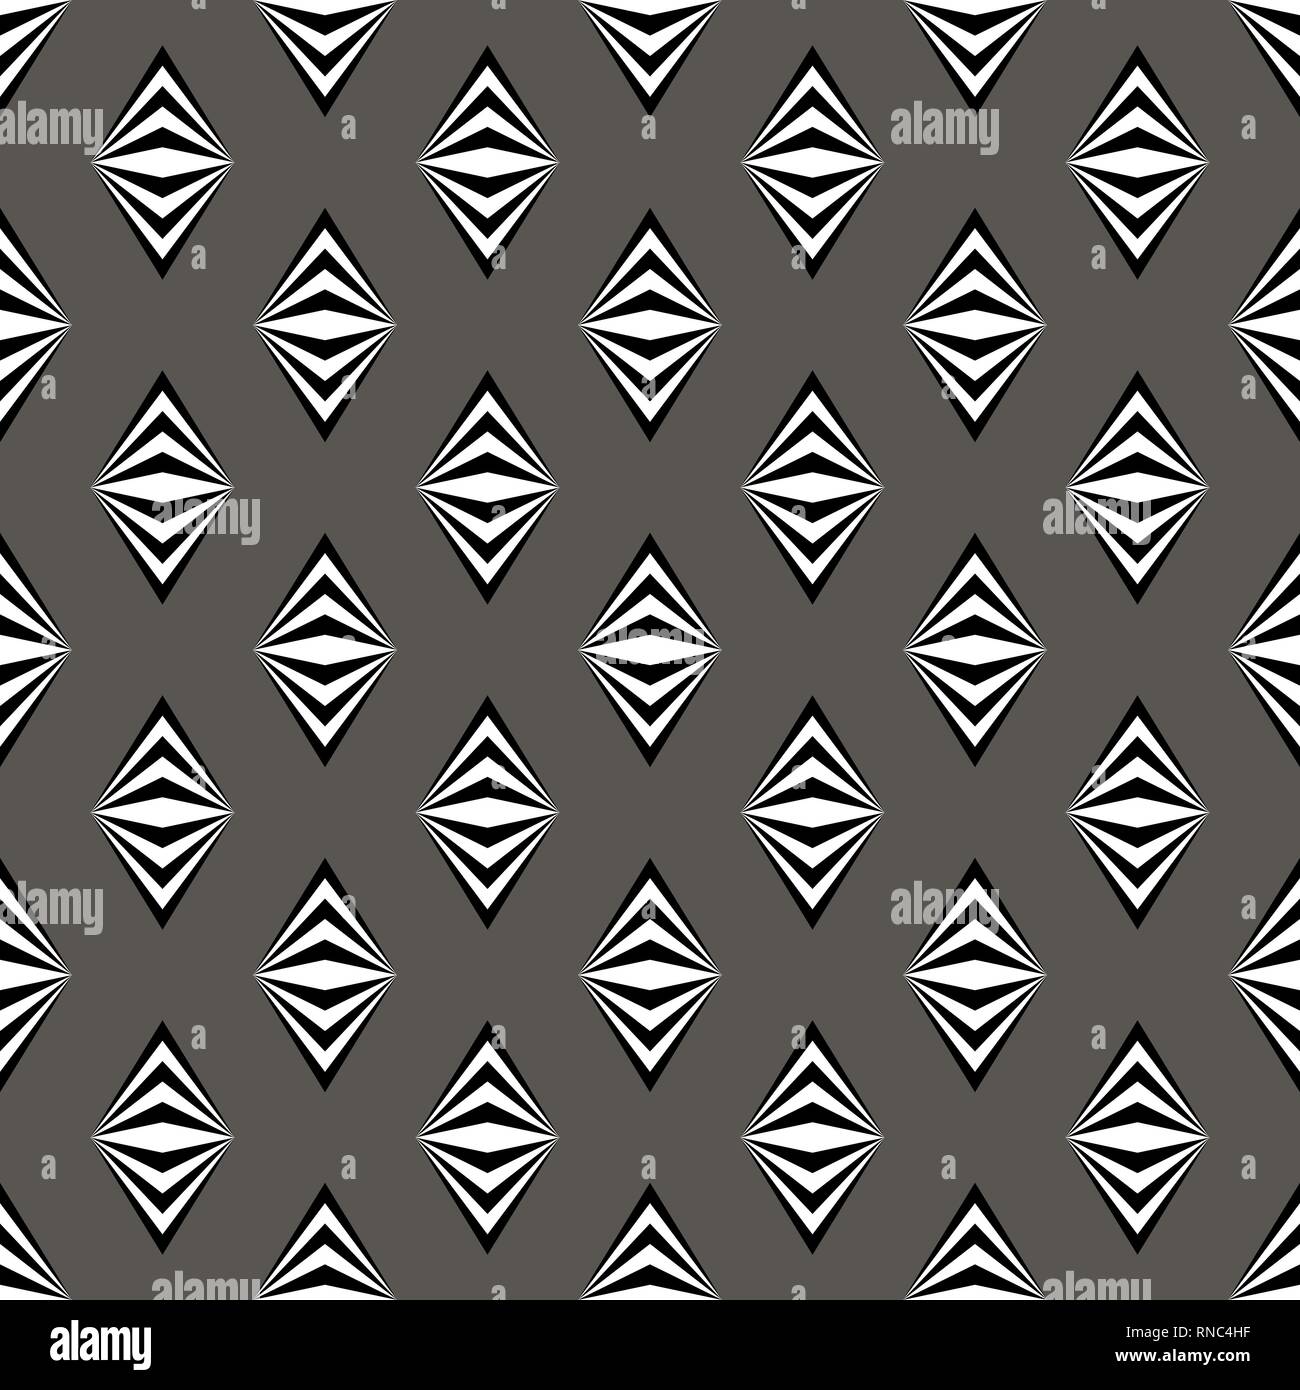 Simple black white gray pattern background with rombs Stock Vector